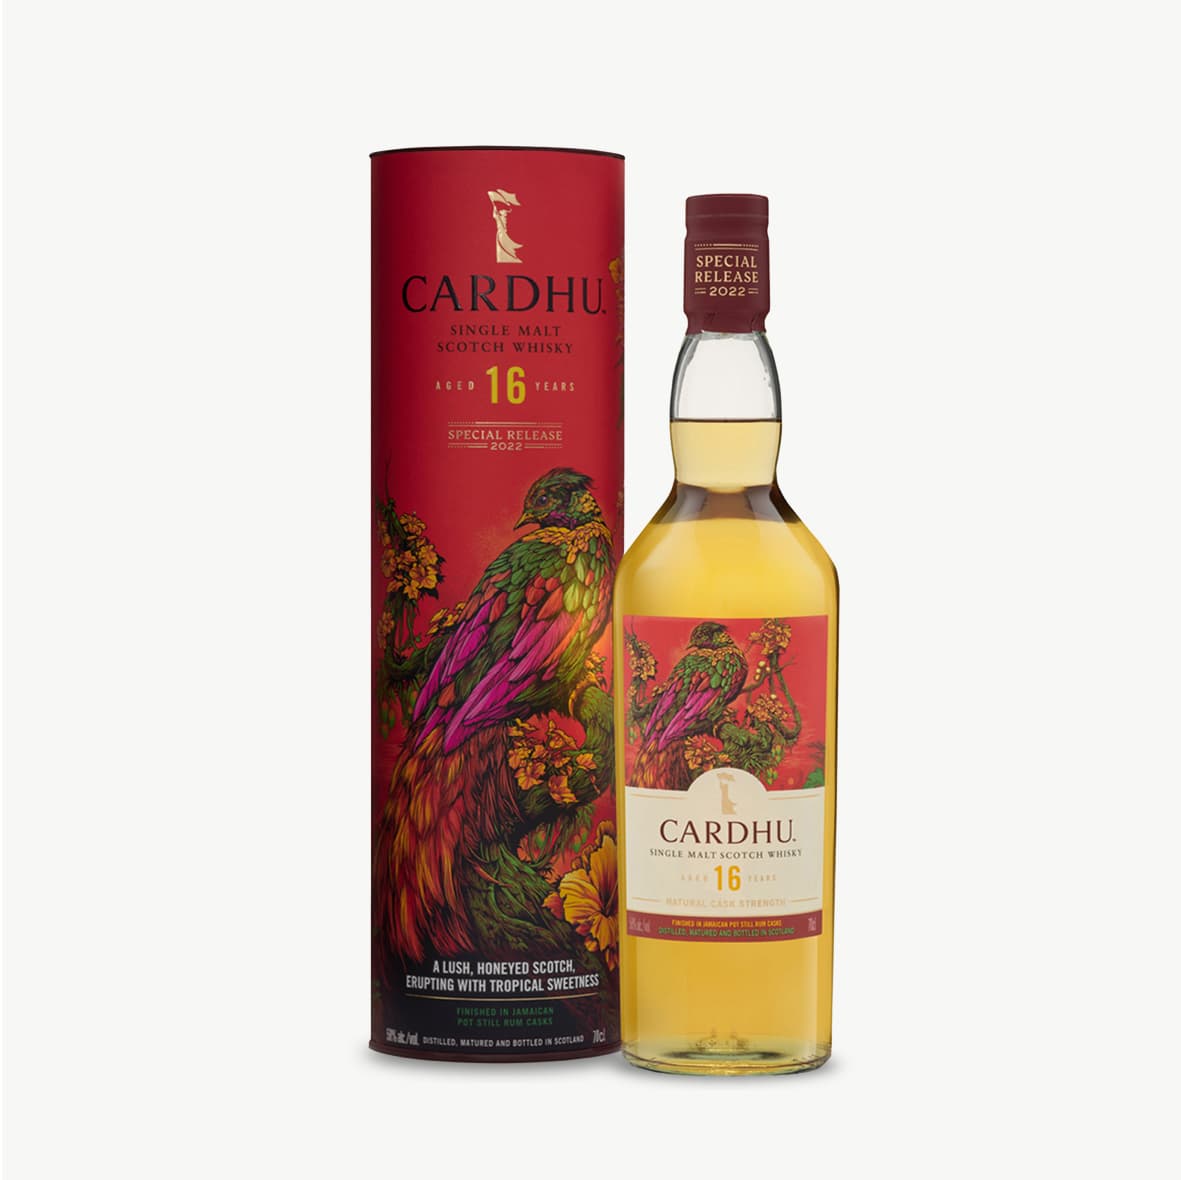 Cardhu 16 year old Special Releases 2022 70cl bottle with packaging